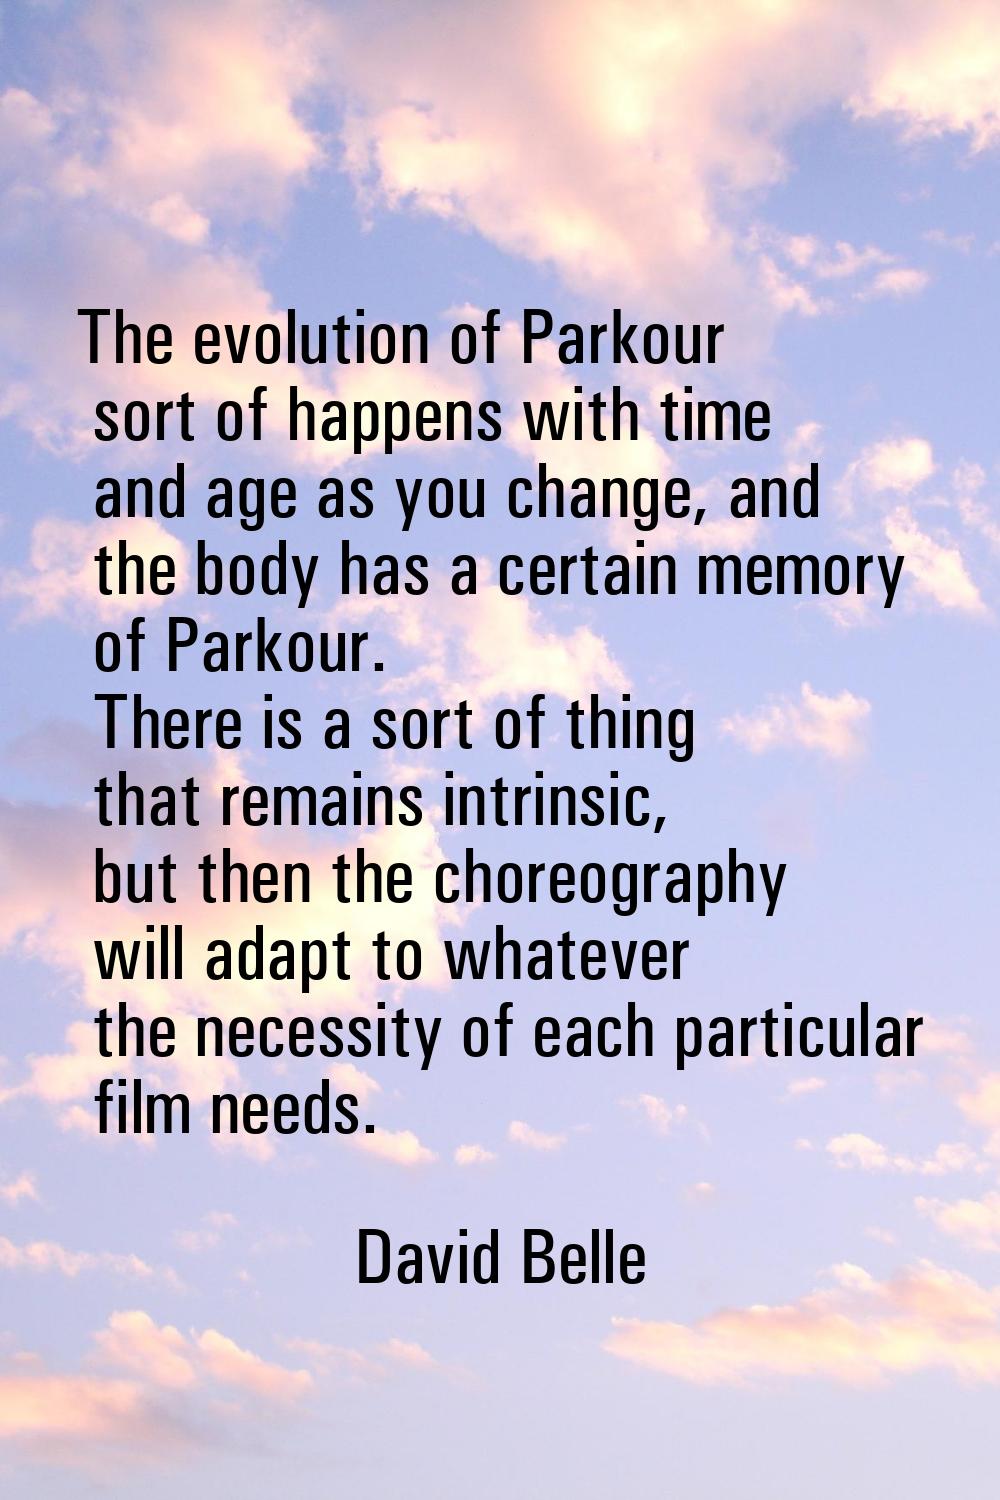 The evolution of Parkour sort of happens with time and age as you change, and the body has a certai